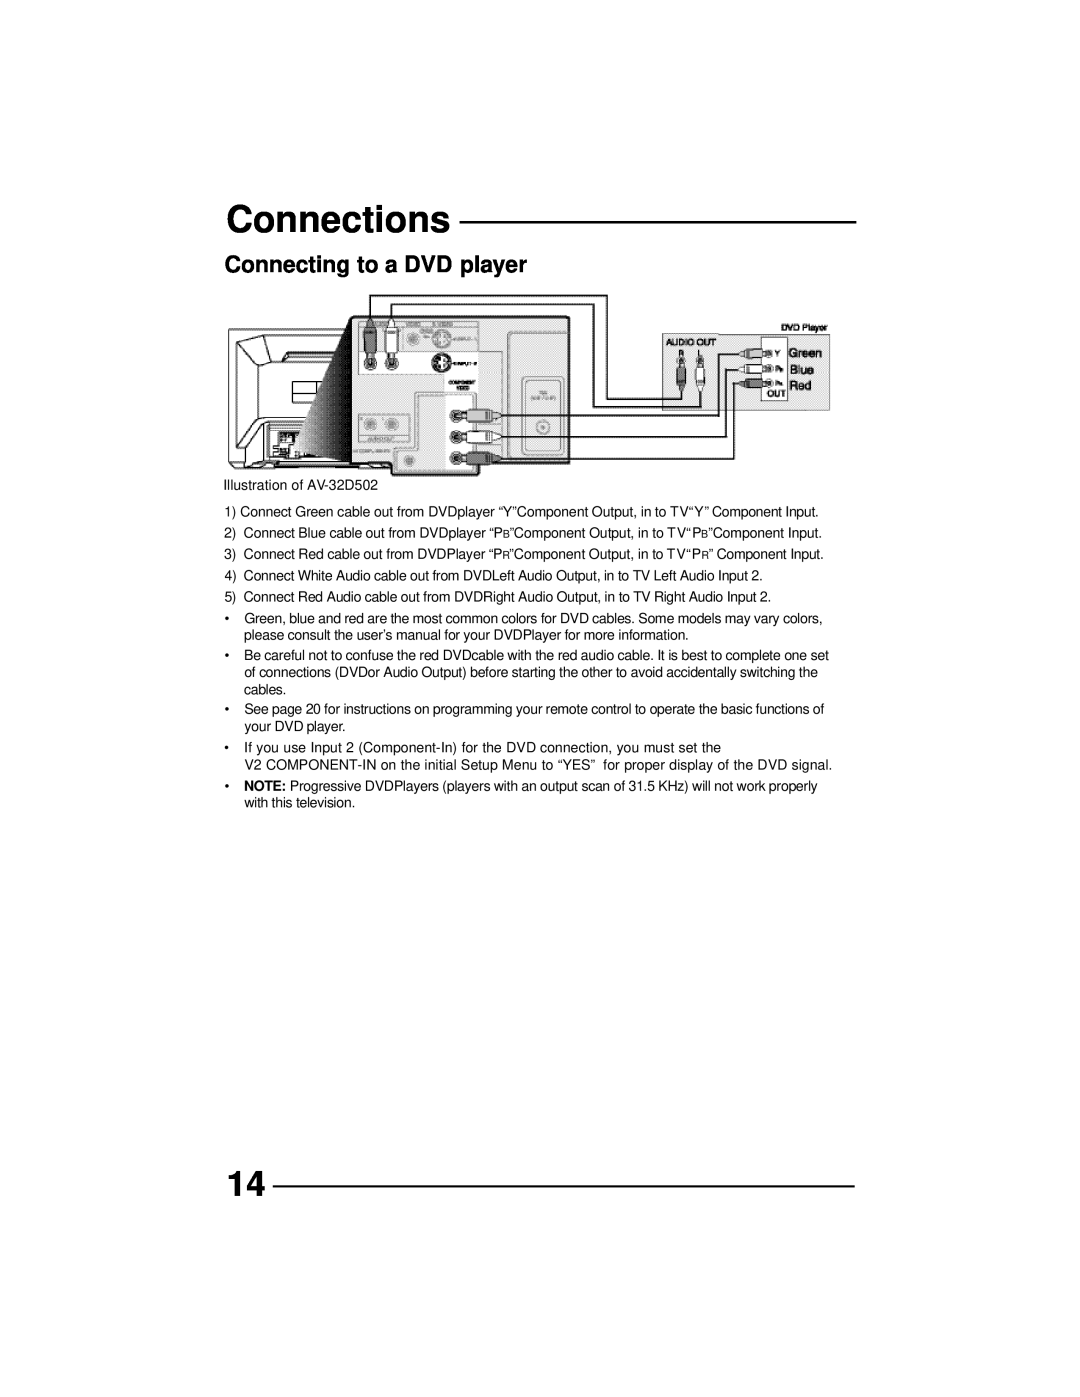 JVC AV 36D202, AV 36D502, AV 36D302, AV 32D302, AV 32D502, AV 27D502, AV 32D202 manual Connecting to a DVD player, Connections 